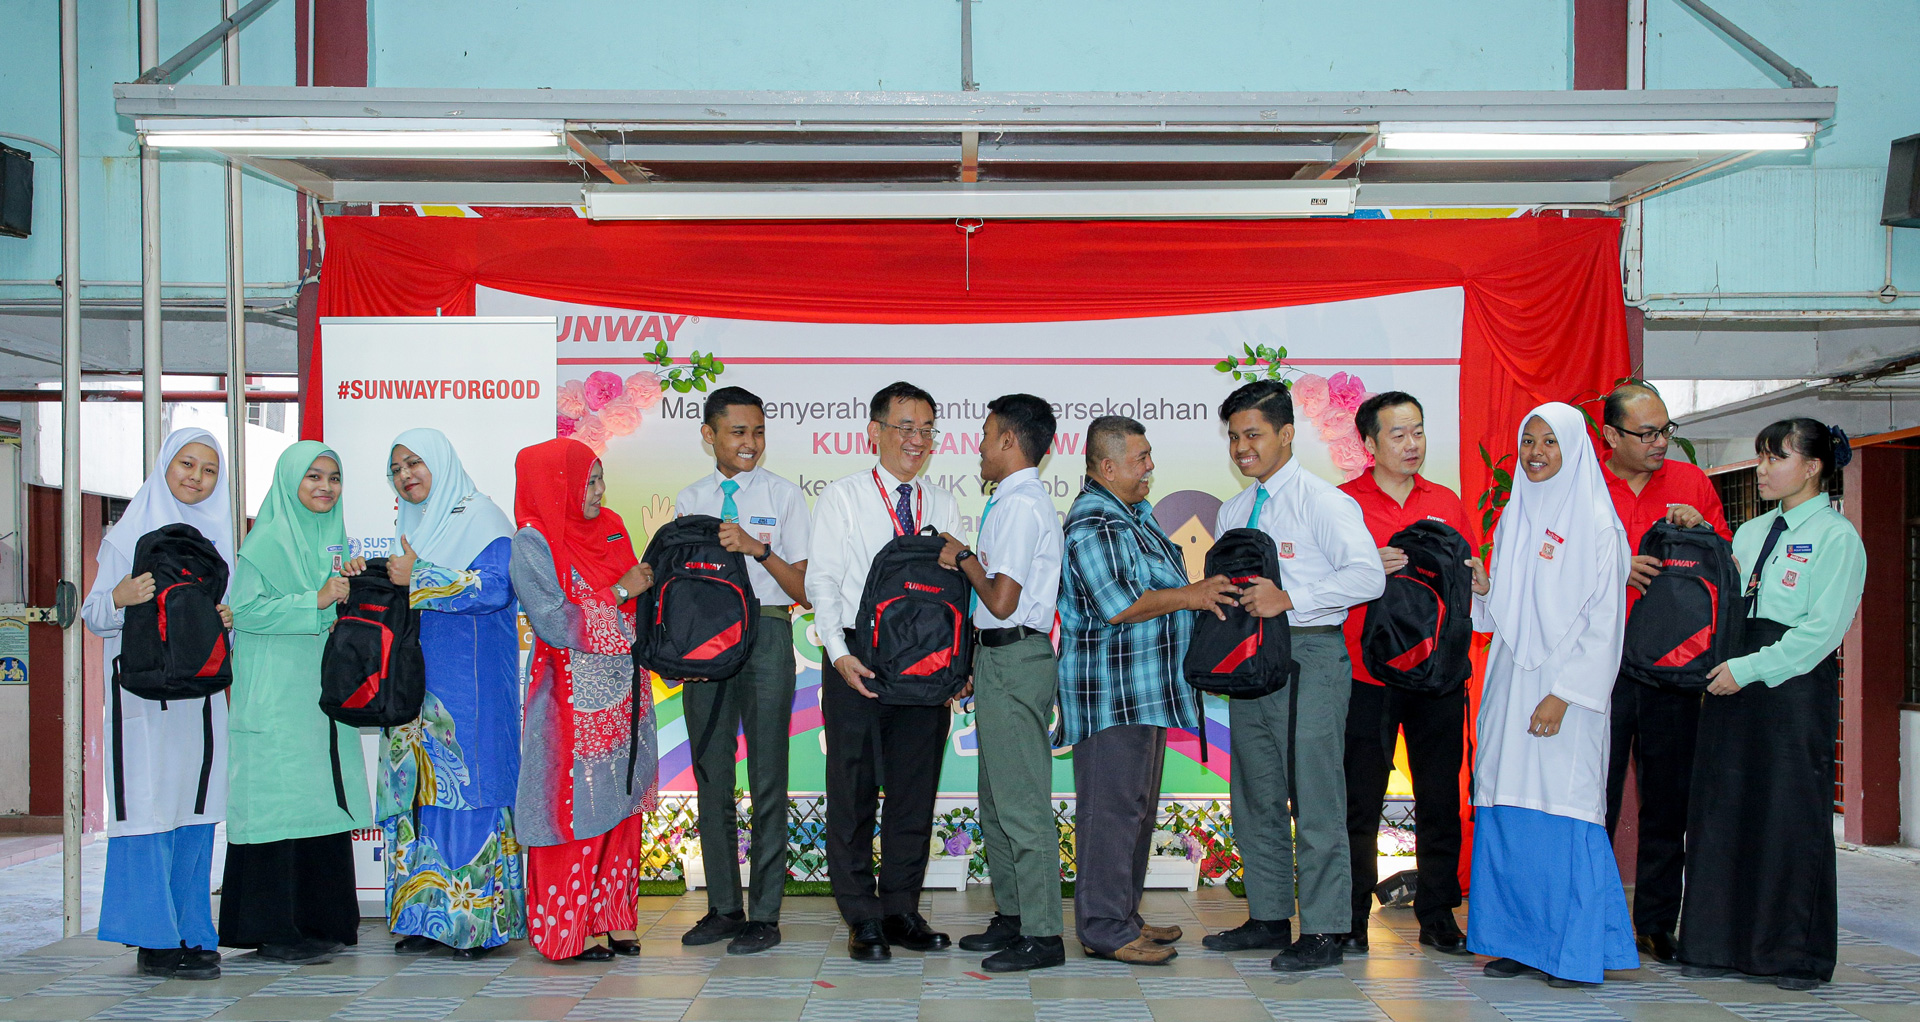 Sunway Kicks Off Its #SunwayforGood Initiative, Aims to Reach Out to 65,000 B40 Beneficiaries in 2020